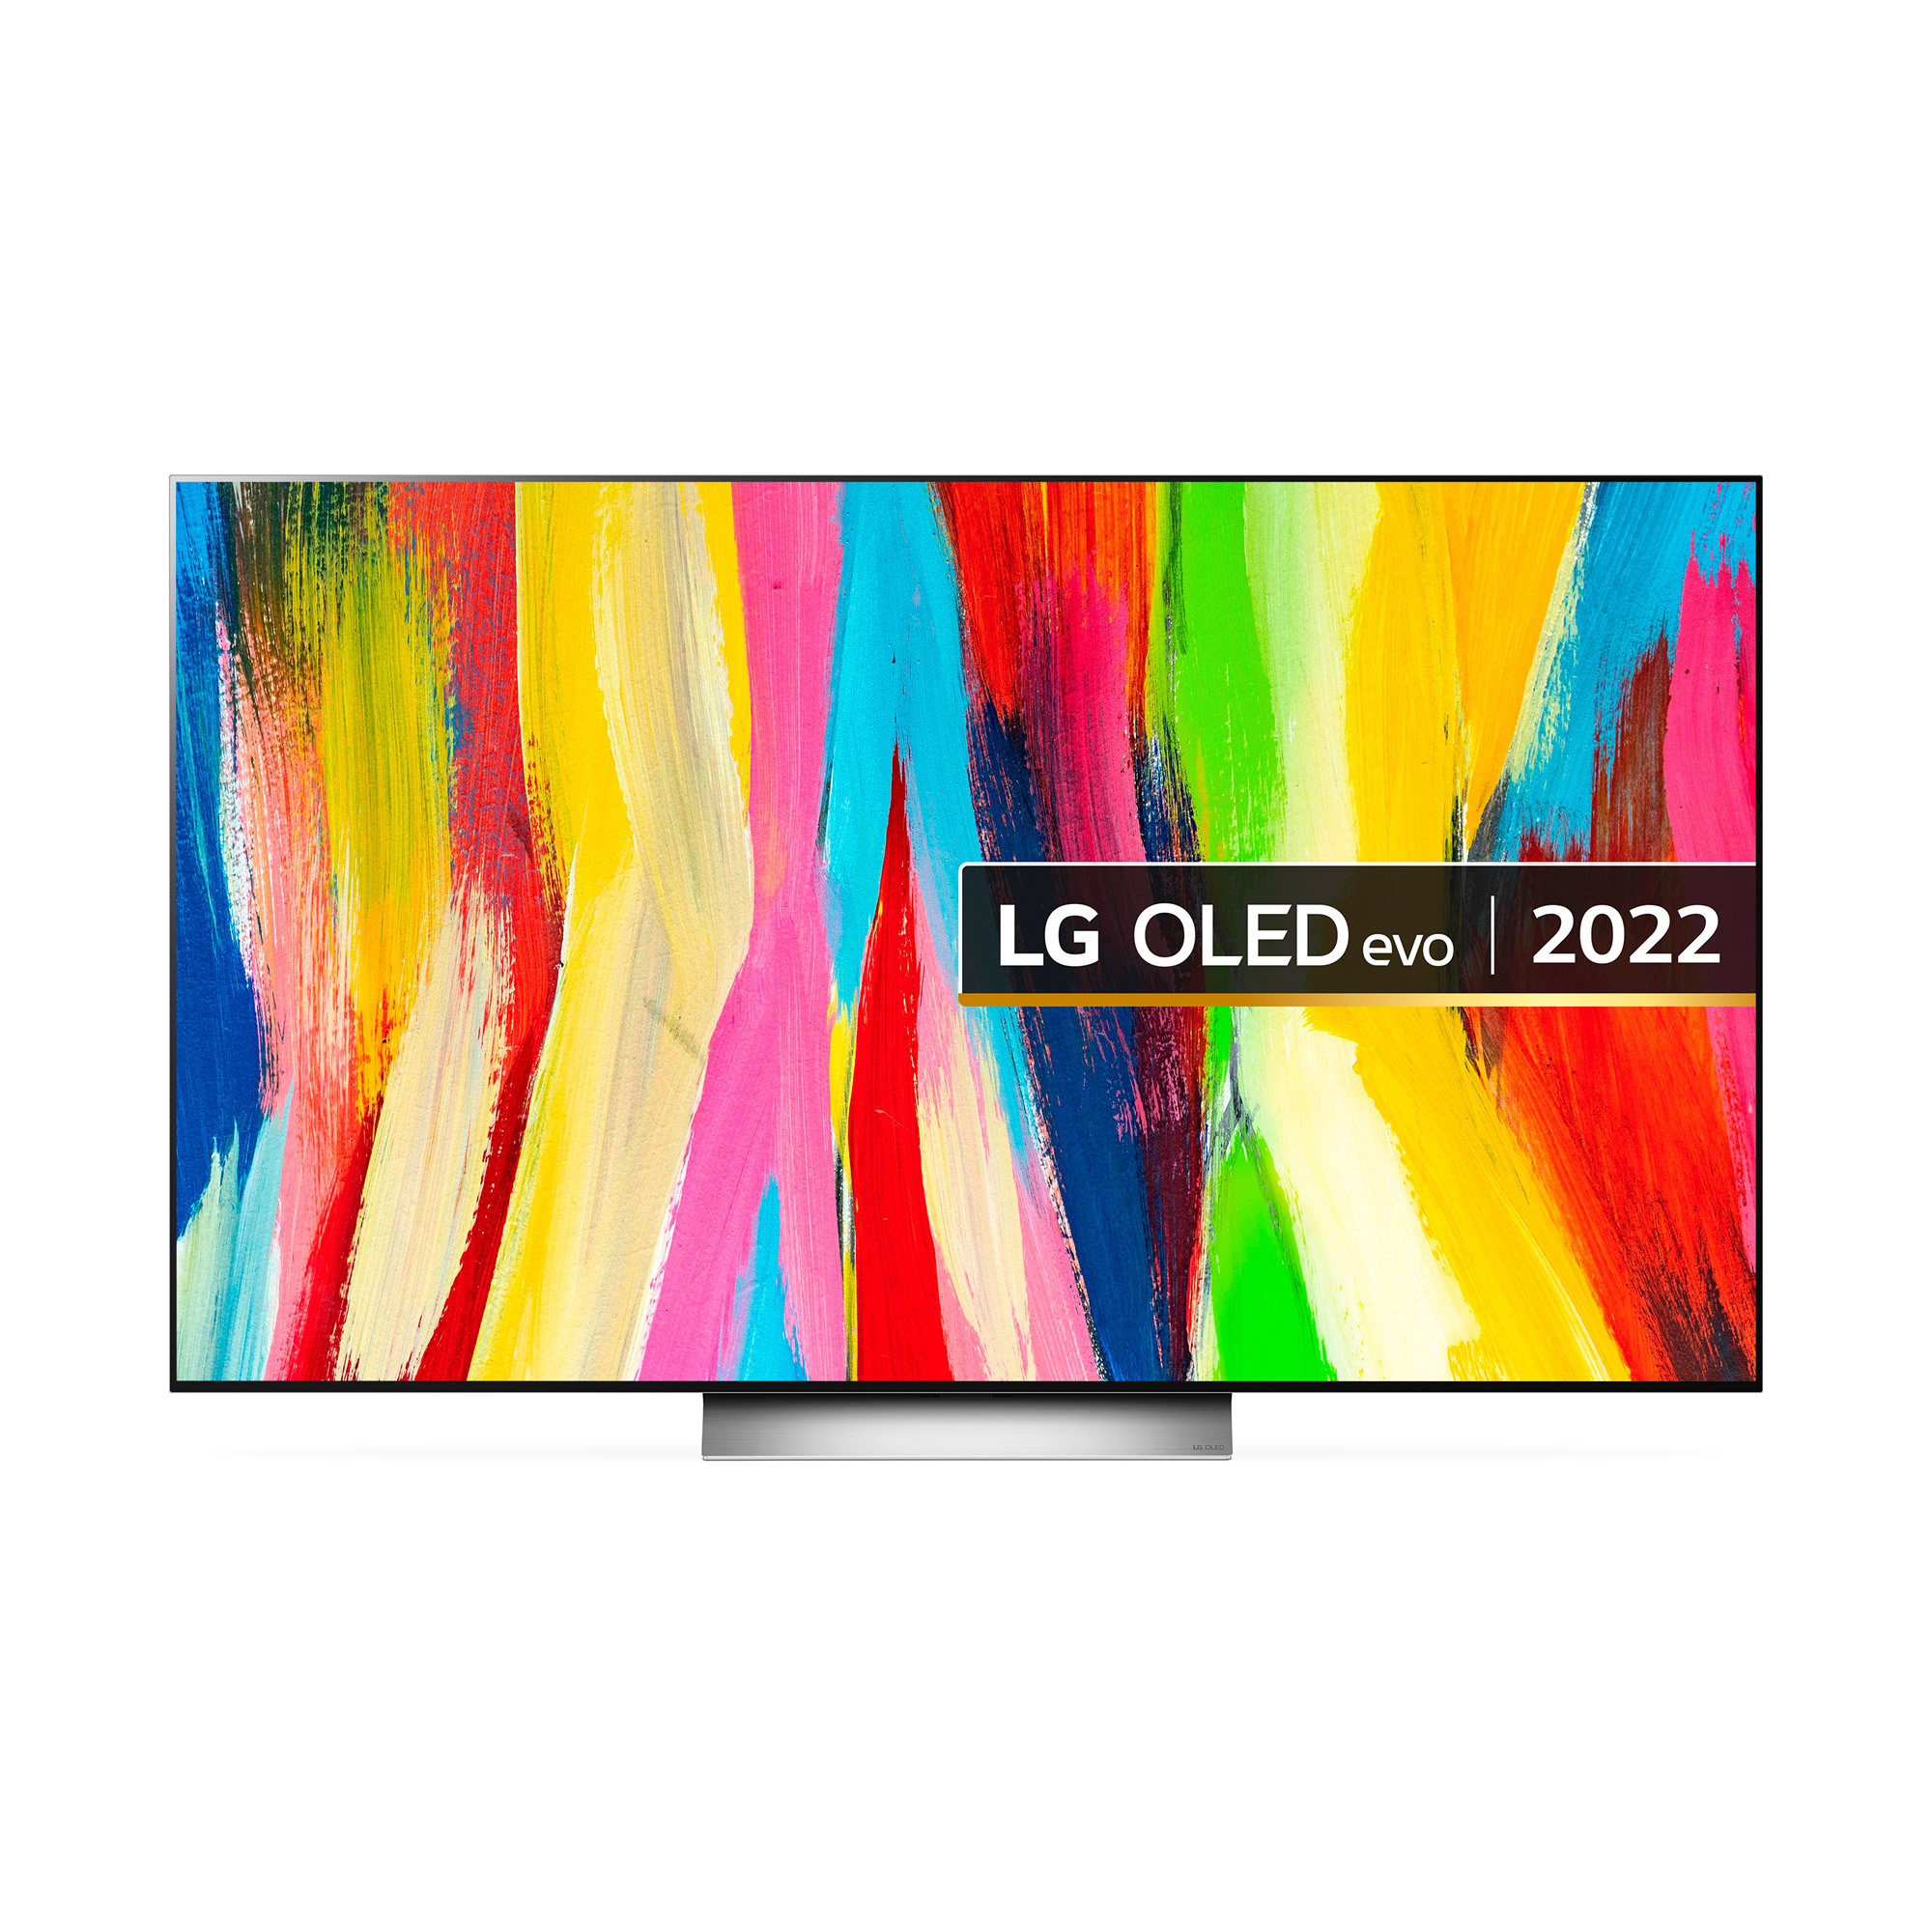 LG 77inch OLED HDR 4K UHD SMART TV WiFi Dolby Atmos